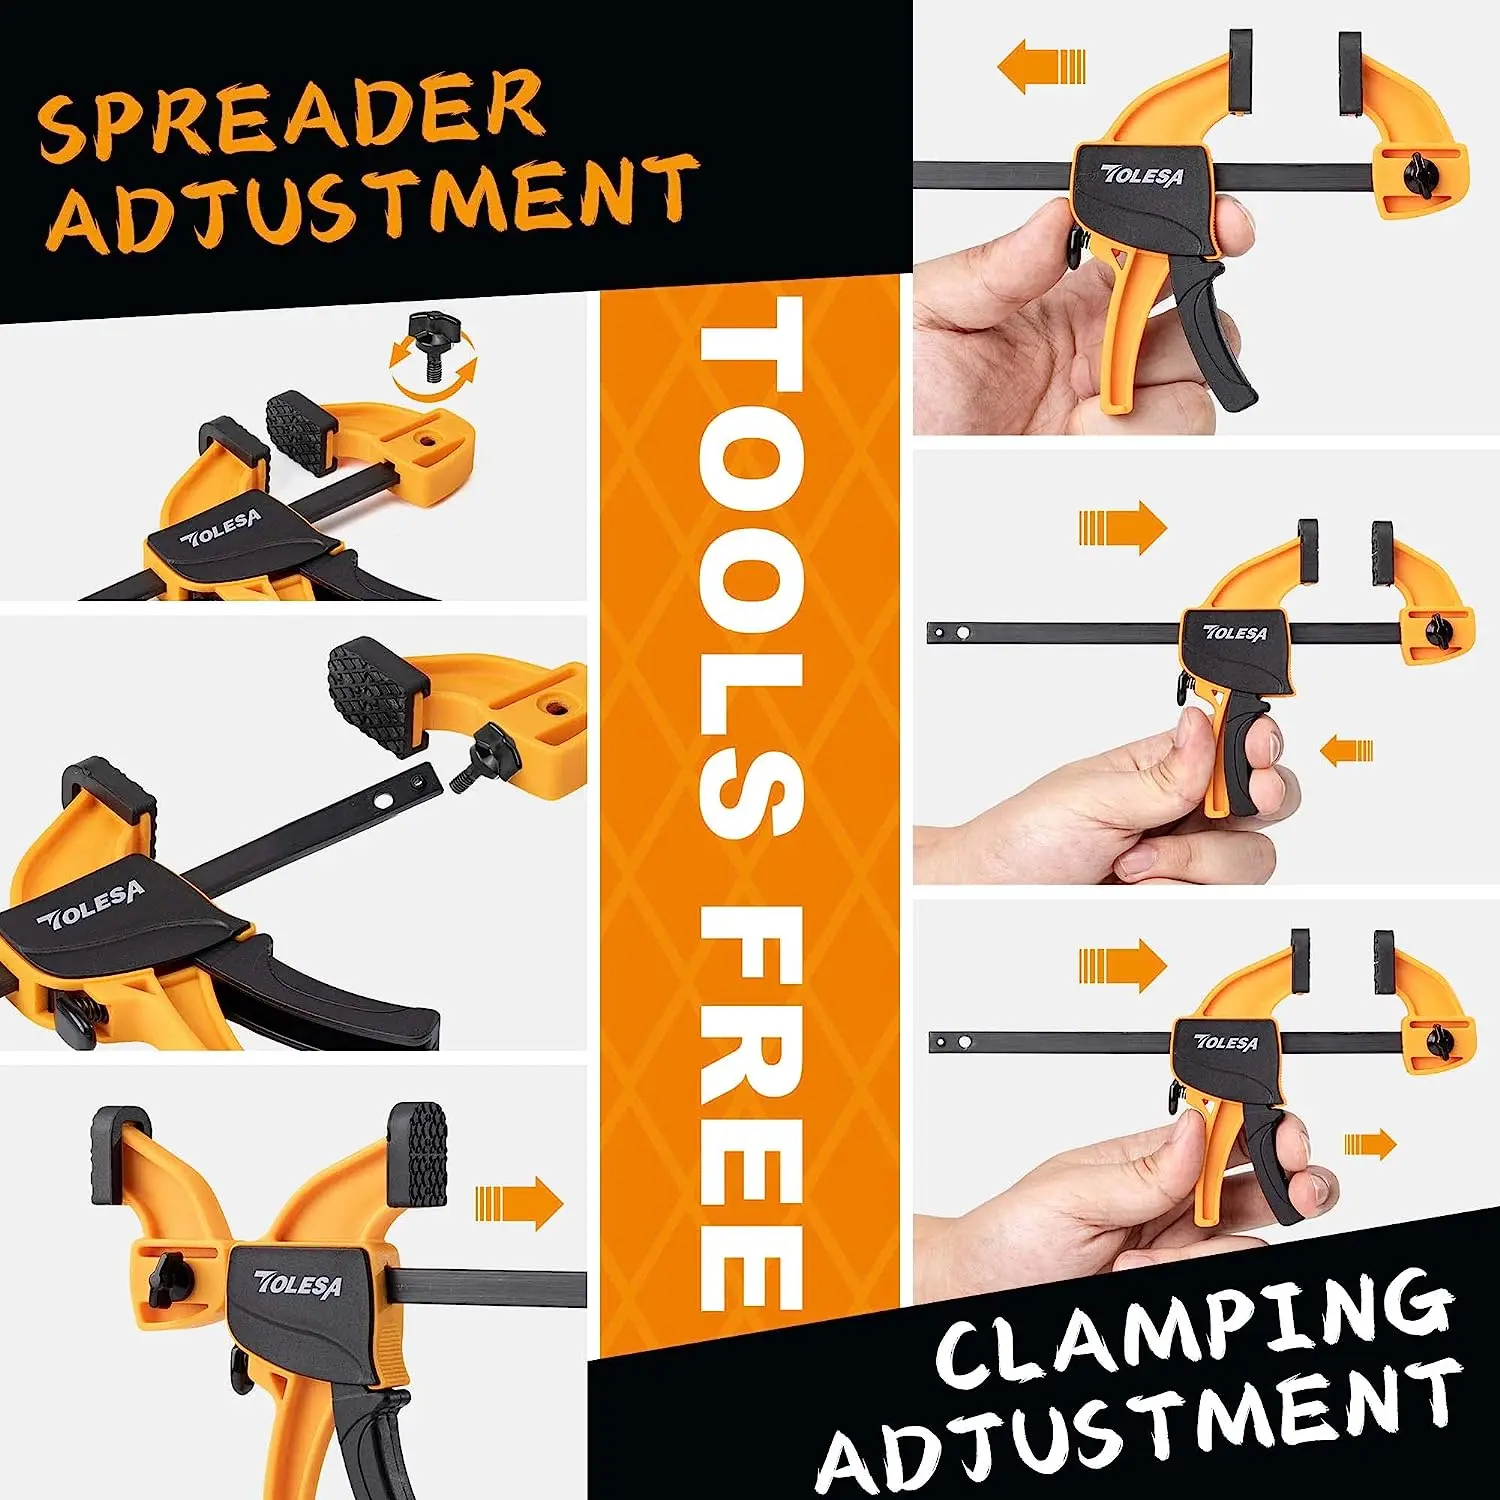 2-Pack Spring-Loaded One-Handed 10” Bar Clamp – Trigger Clamp